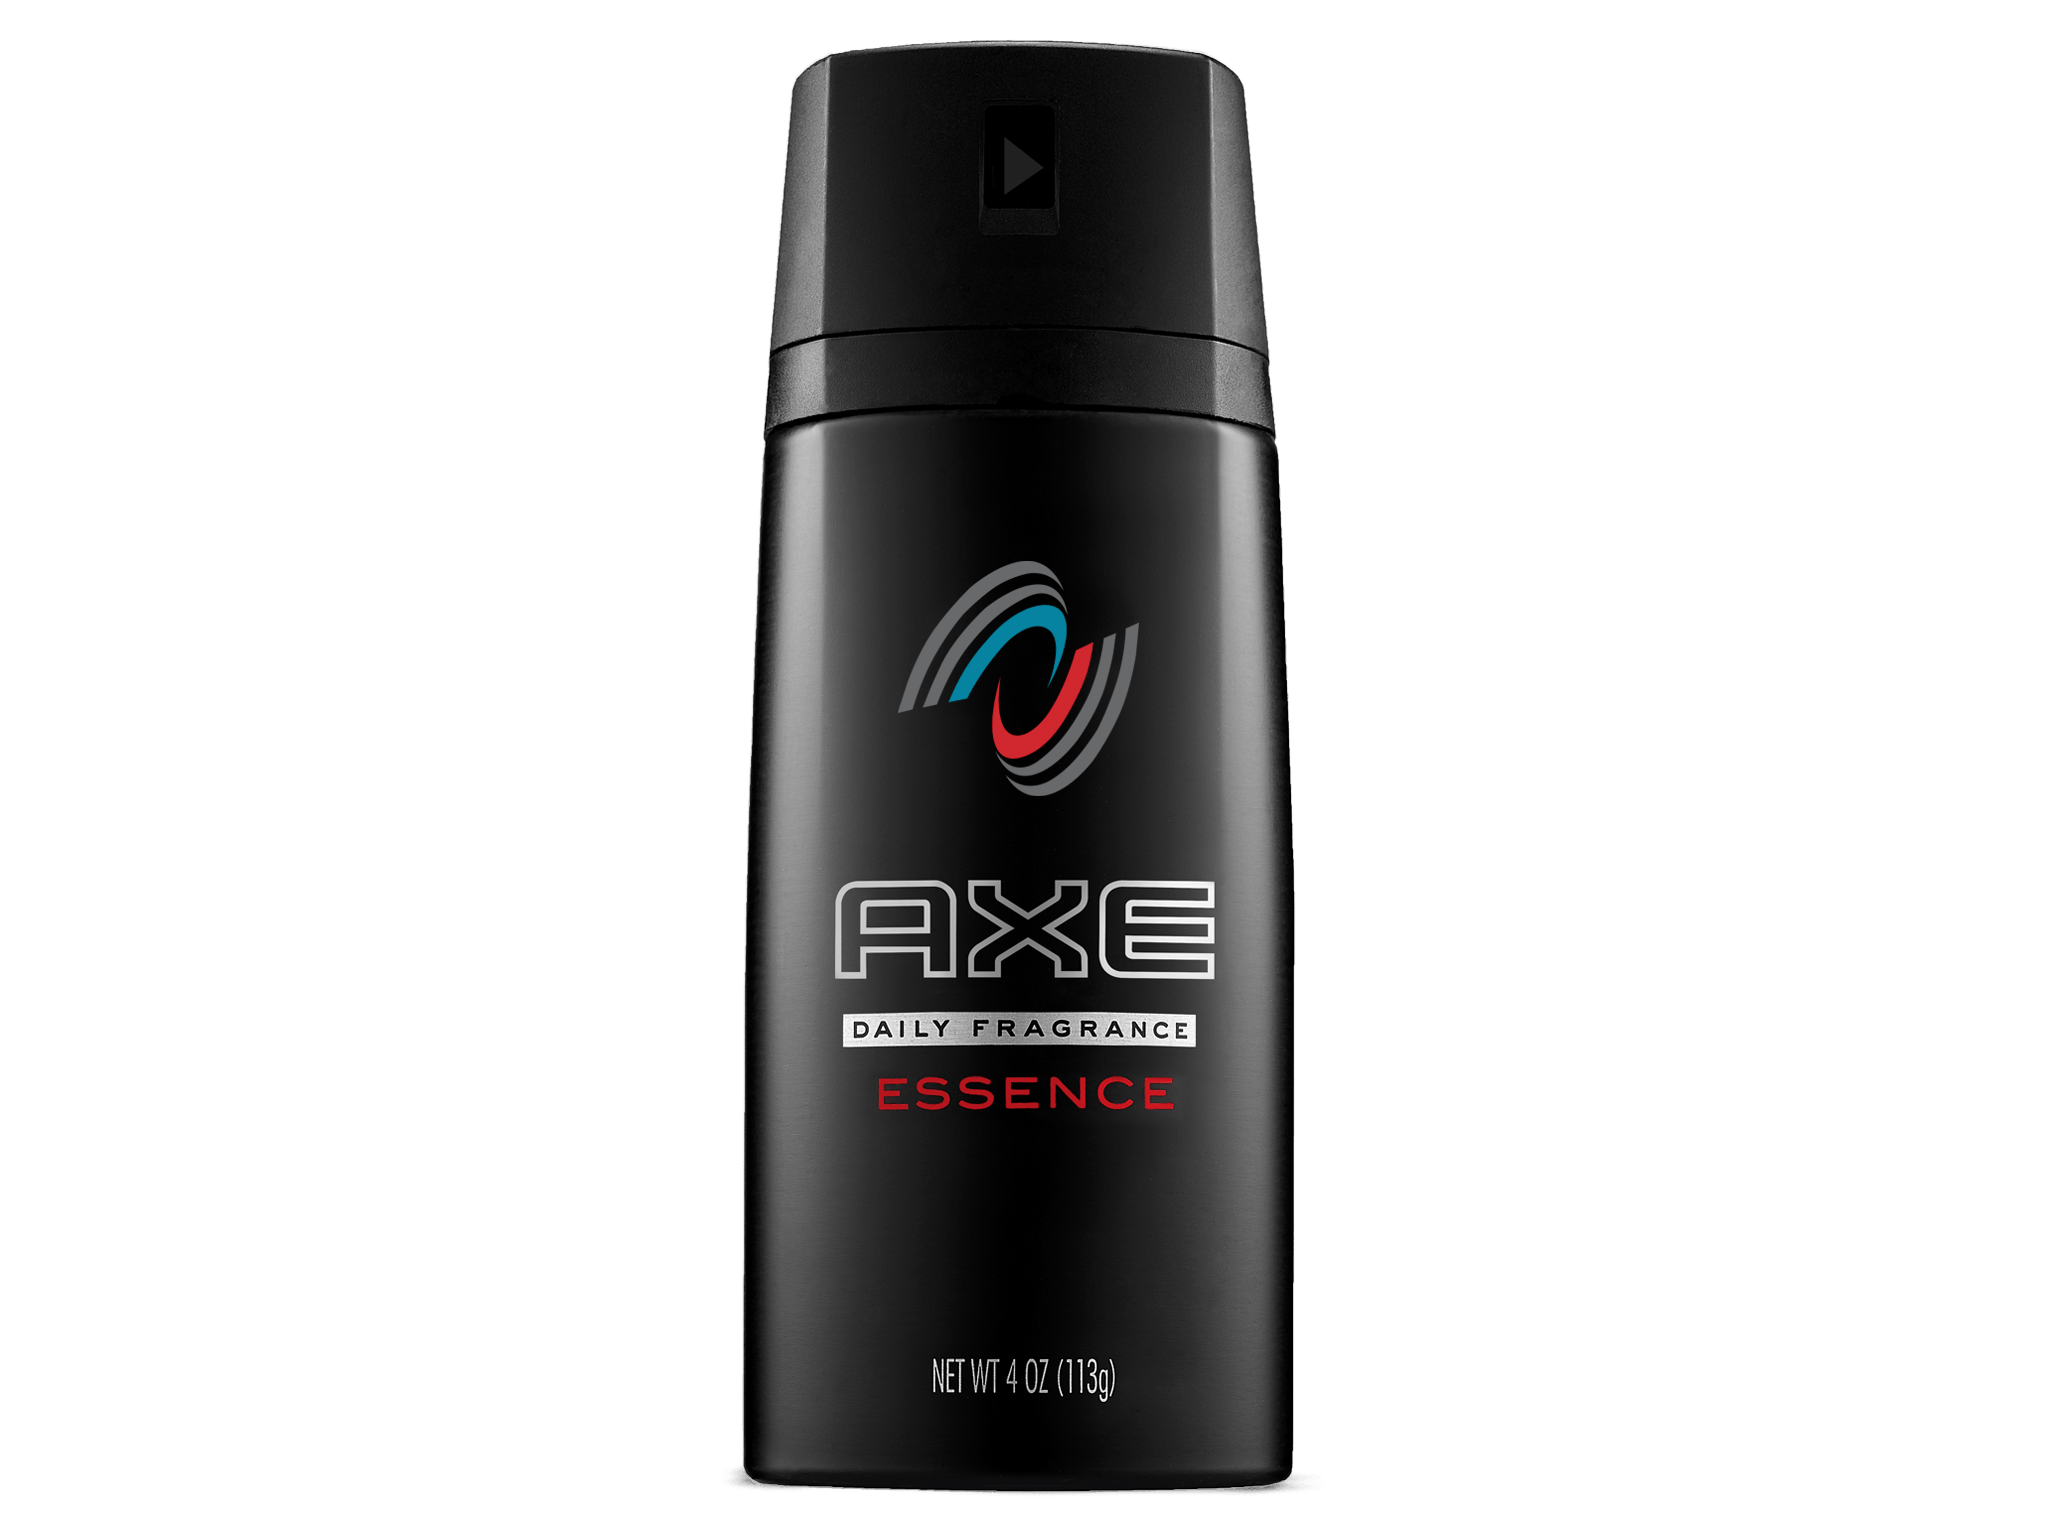 Unilever Shampoo Logo - Axe: Men's Grooming, Lifestyle and Style Tips & Hacks